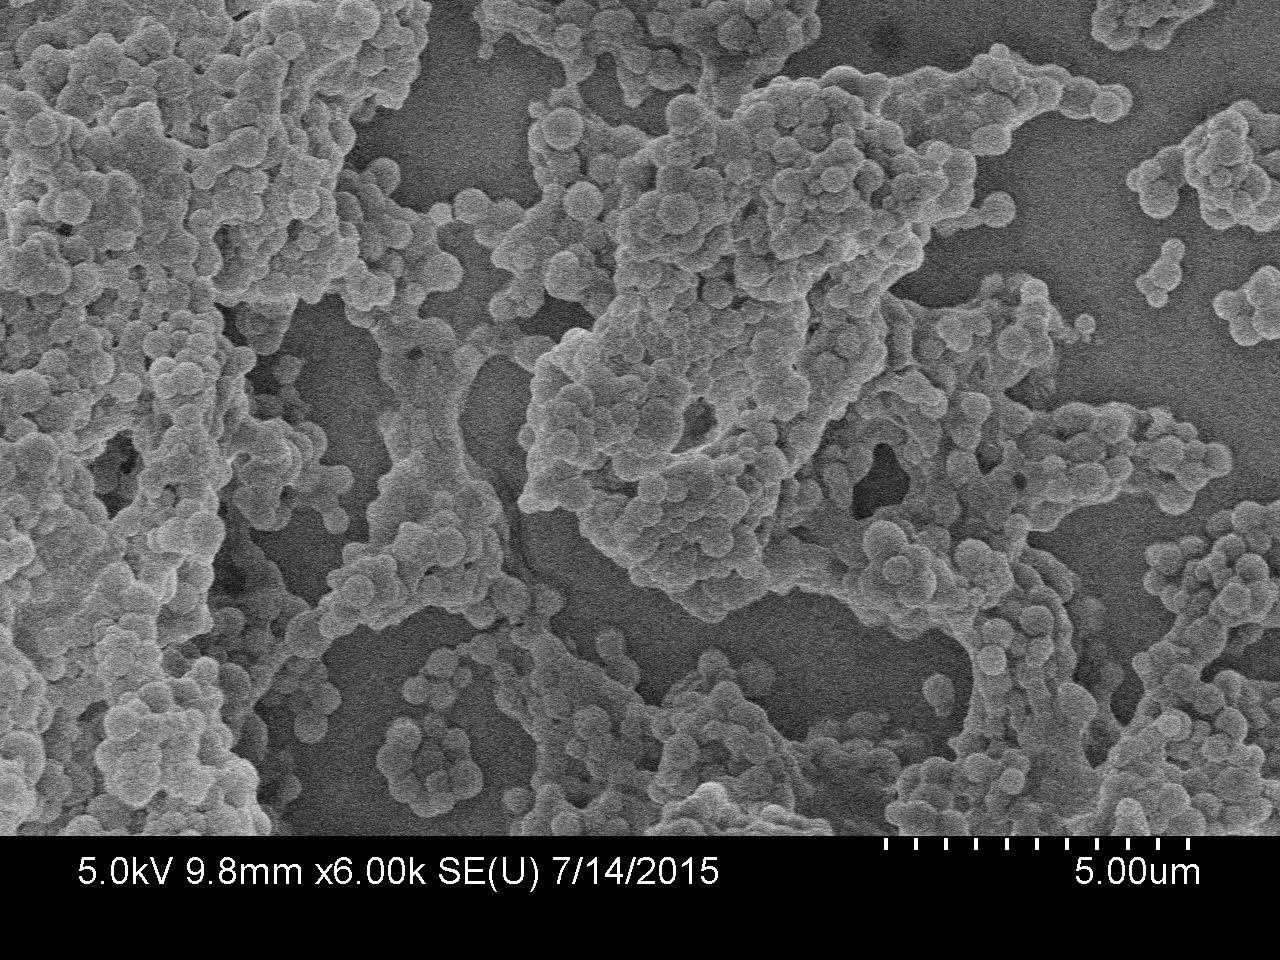 SEM image of chitosan nanoparticles produced this summer